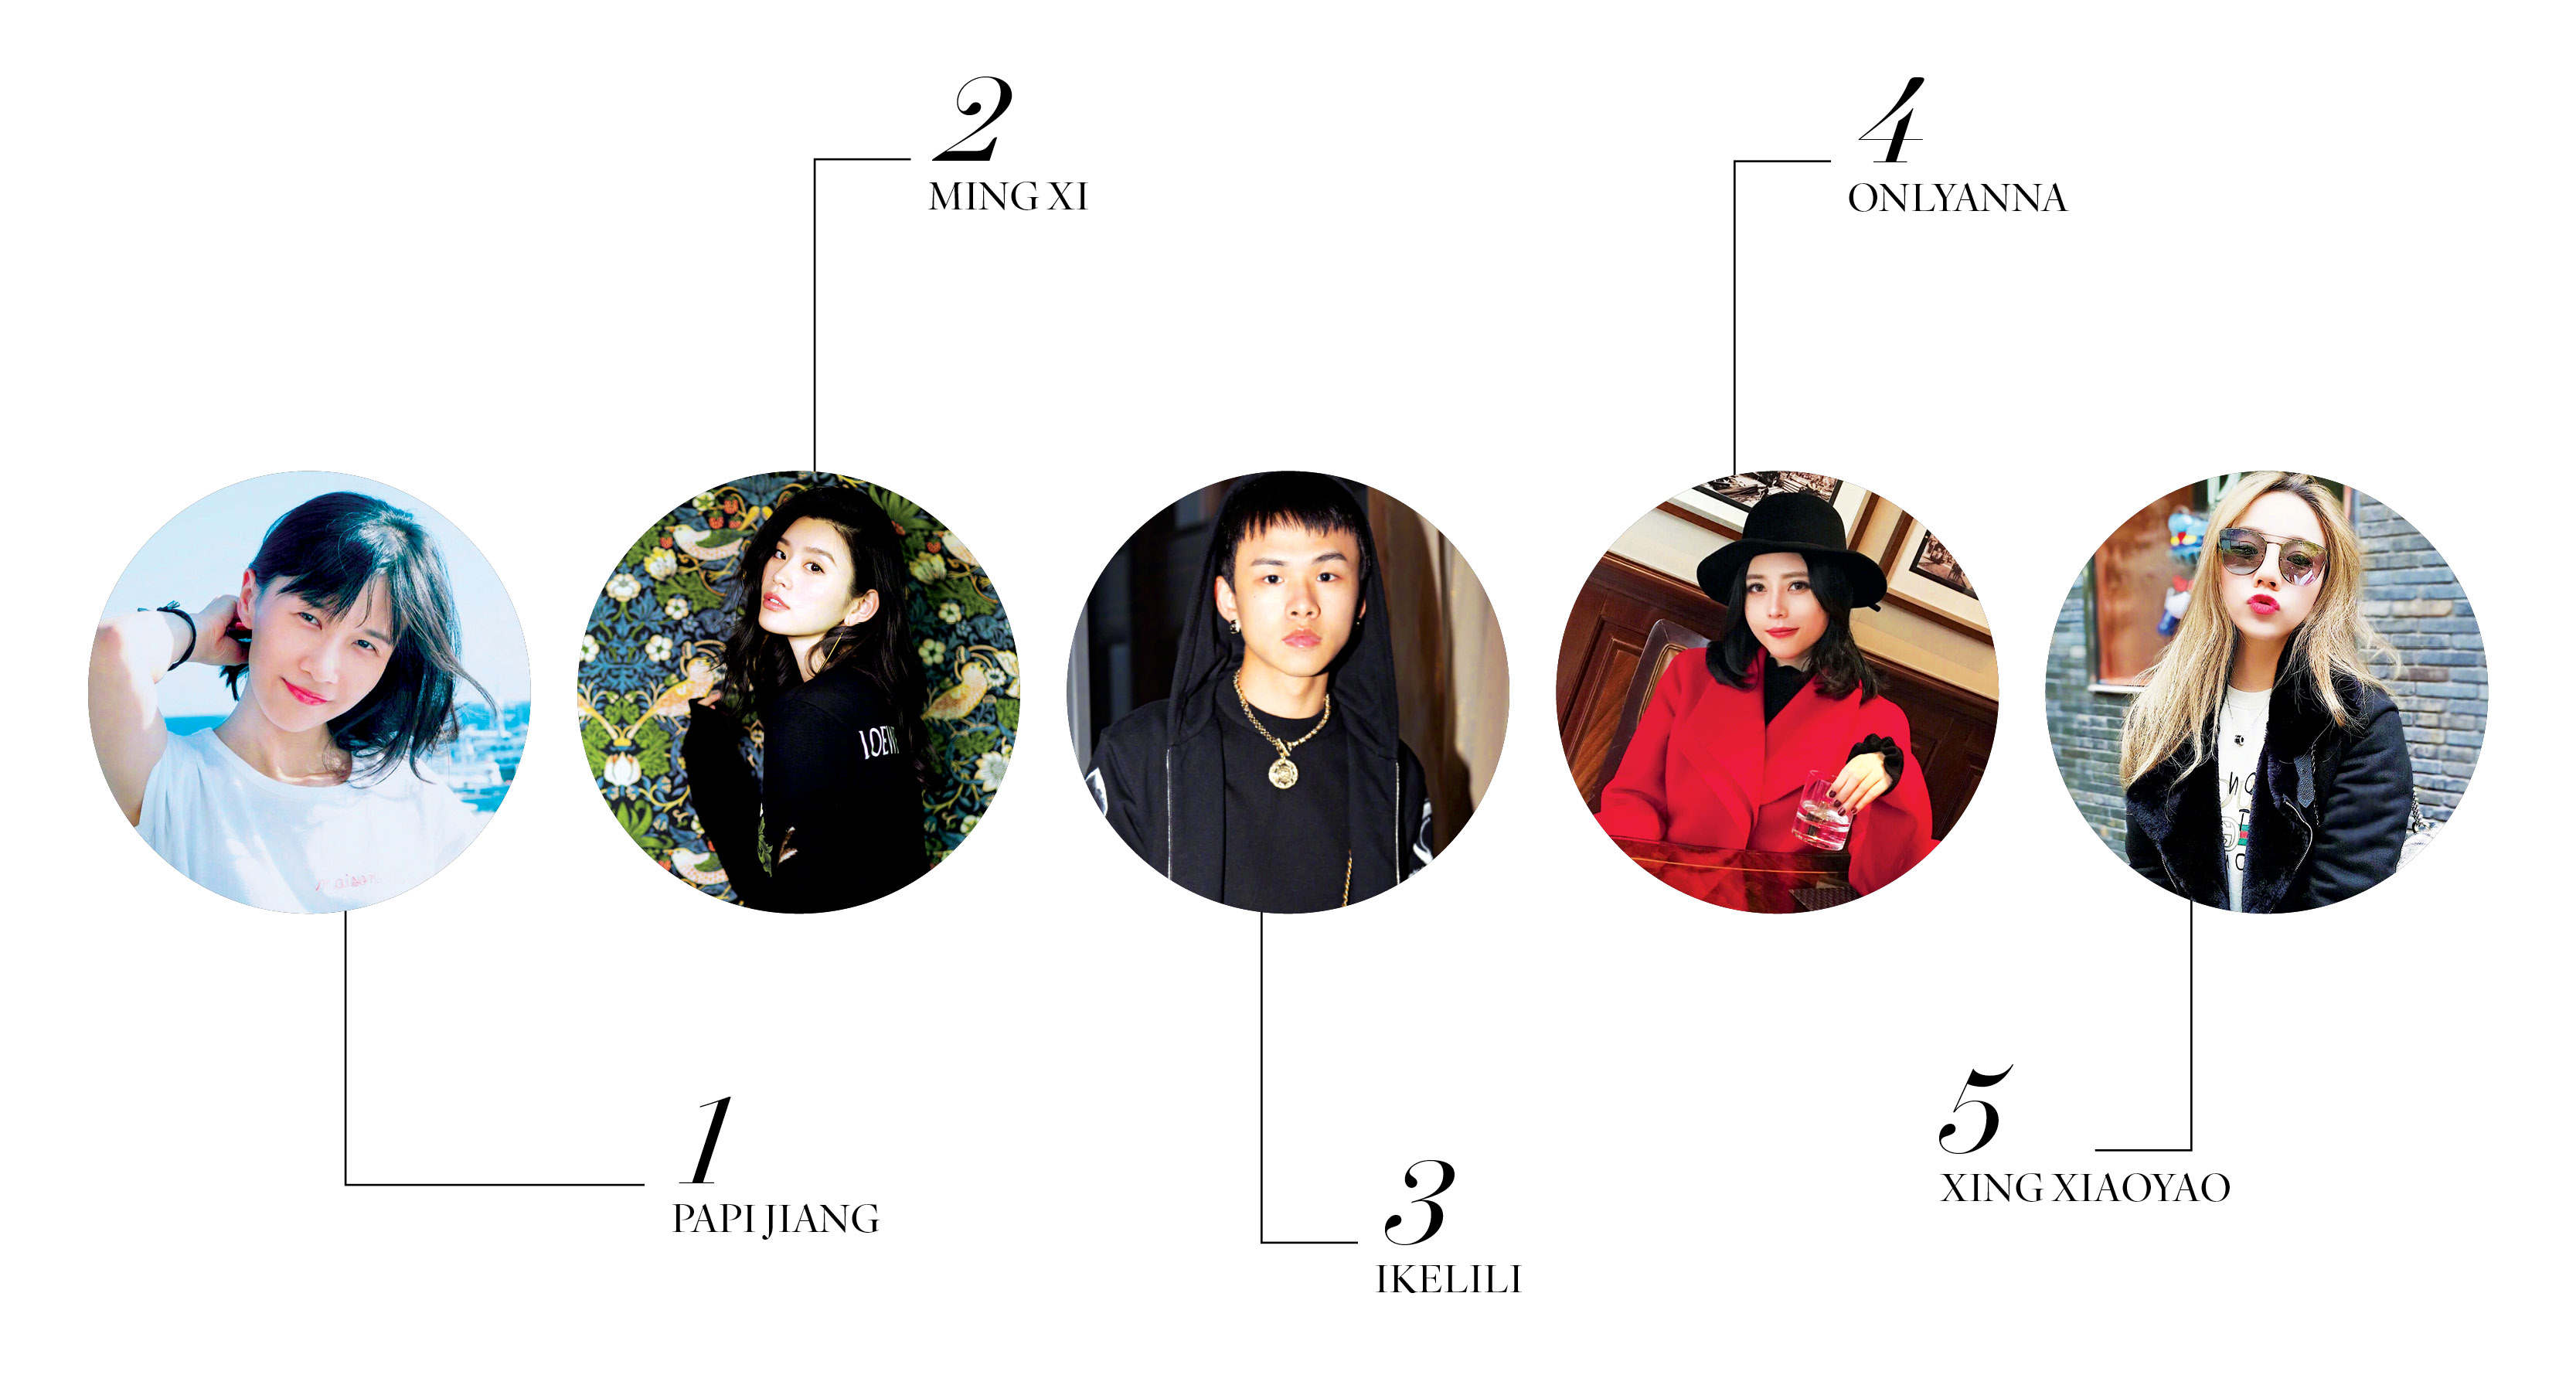 Papi Jiang, Ming Xi, Ikelili, Onlyanna and Xing Xiaoyao round out the top five spots on the list